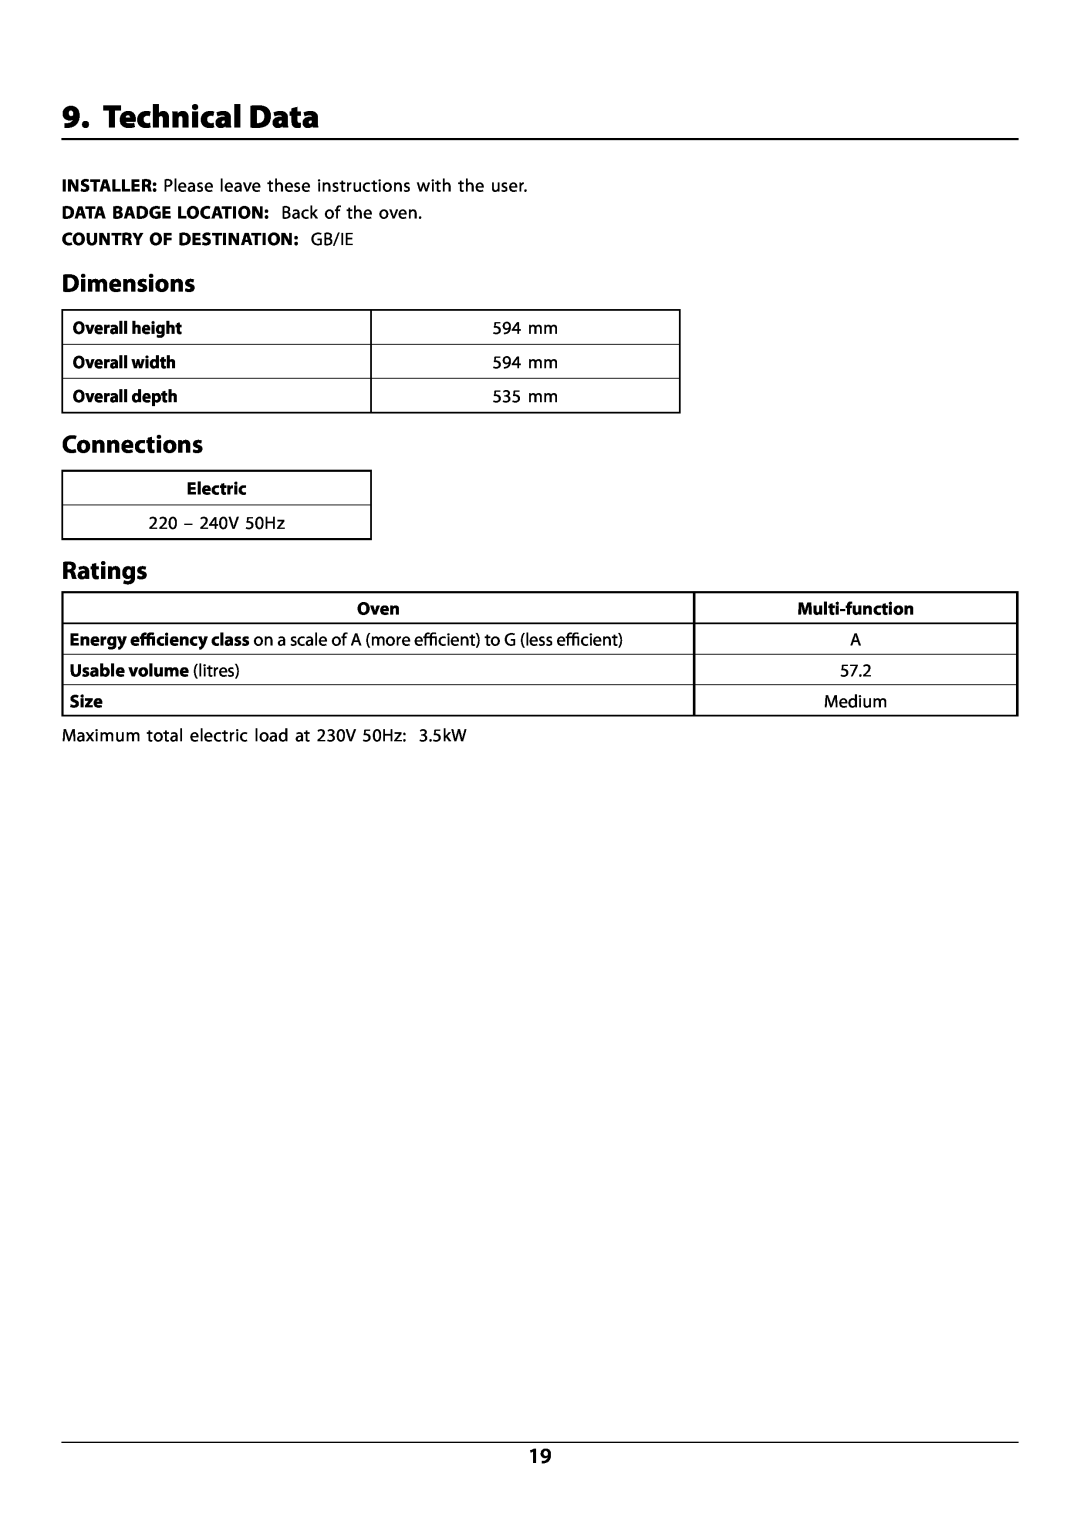 Rangemaster R6012 manual Technical Data, Dimensions, Connections, Ratings 